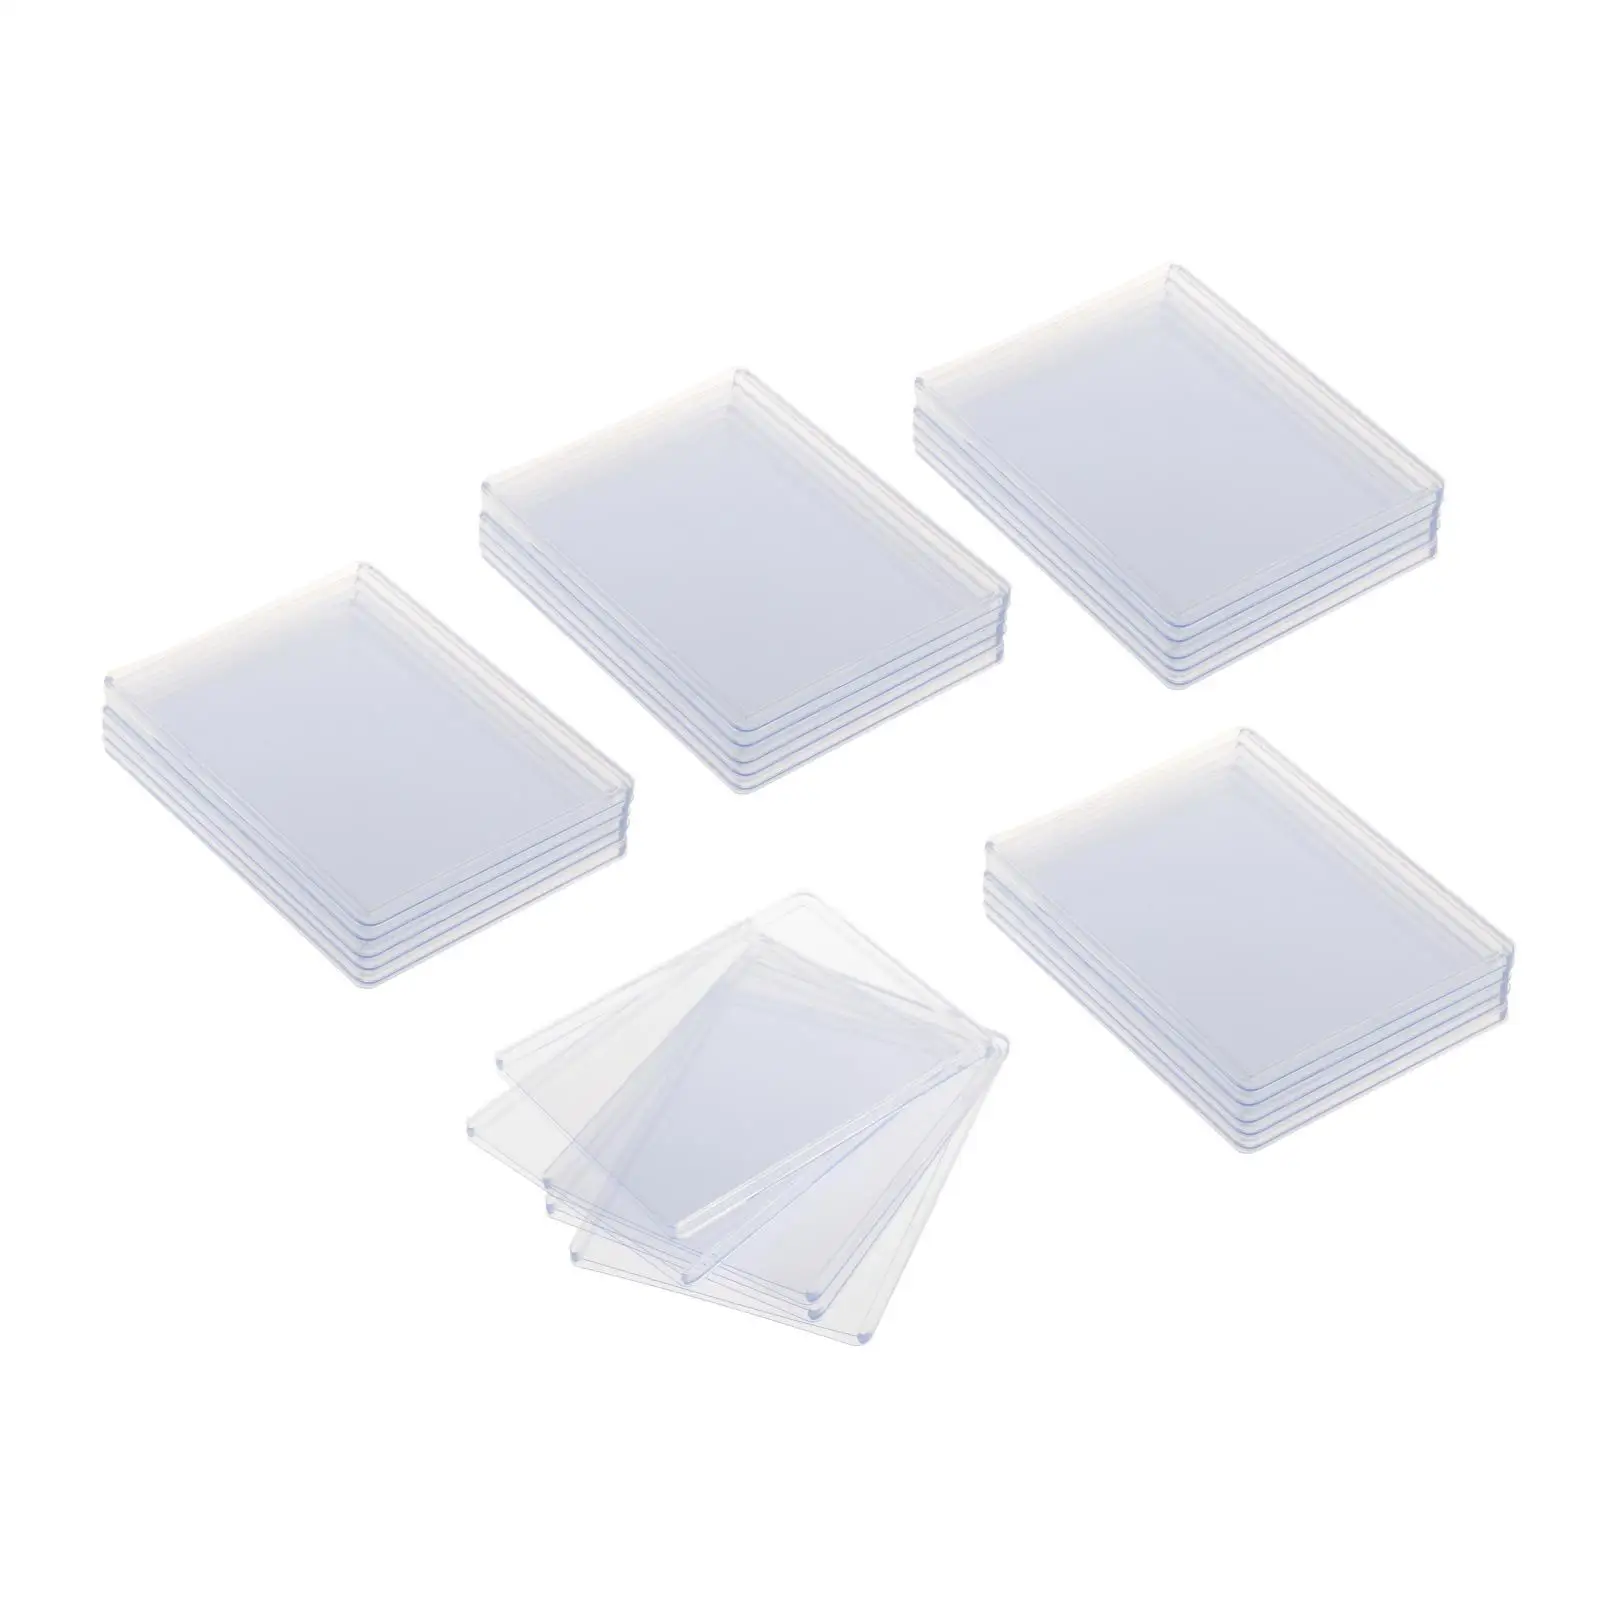 

25Pcs Clear Card Sleeves Card Protectors Protective Lightweight Collecting Supplies Card Holder for Hobbyists Sports Cards